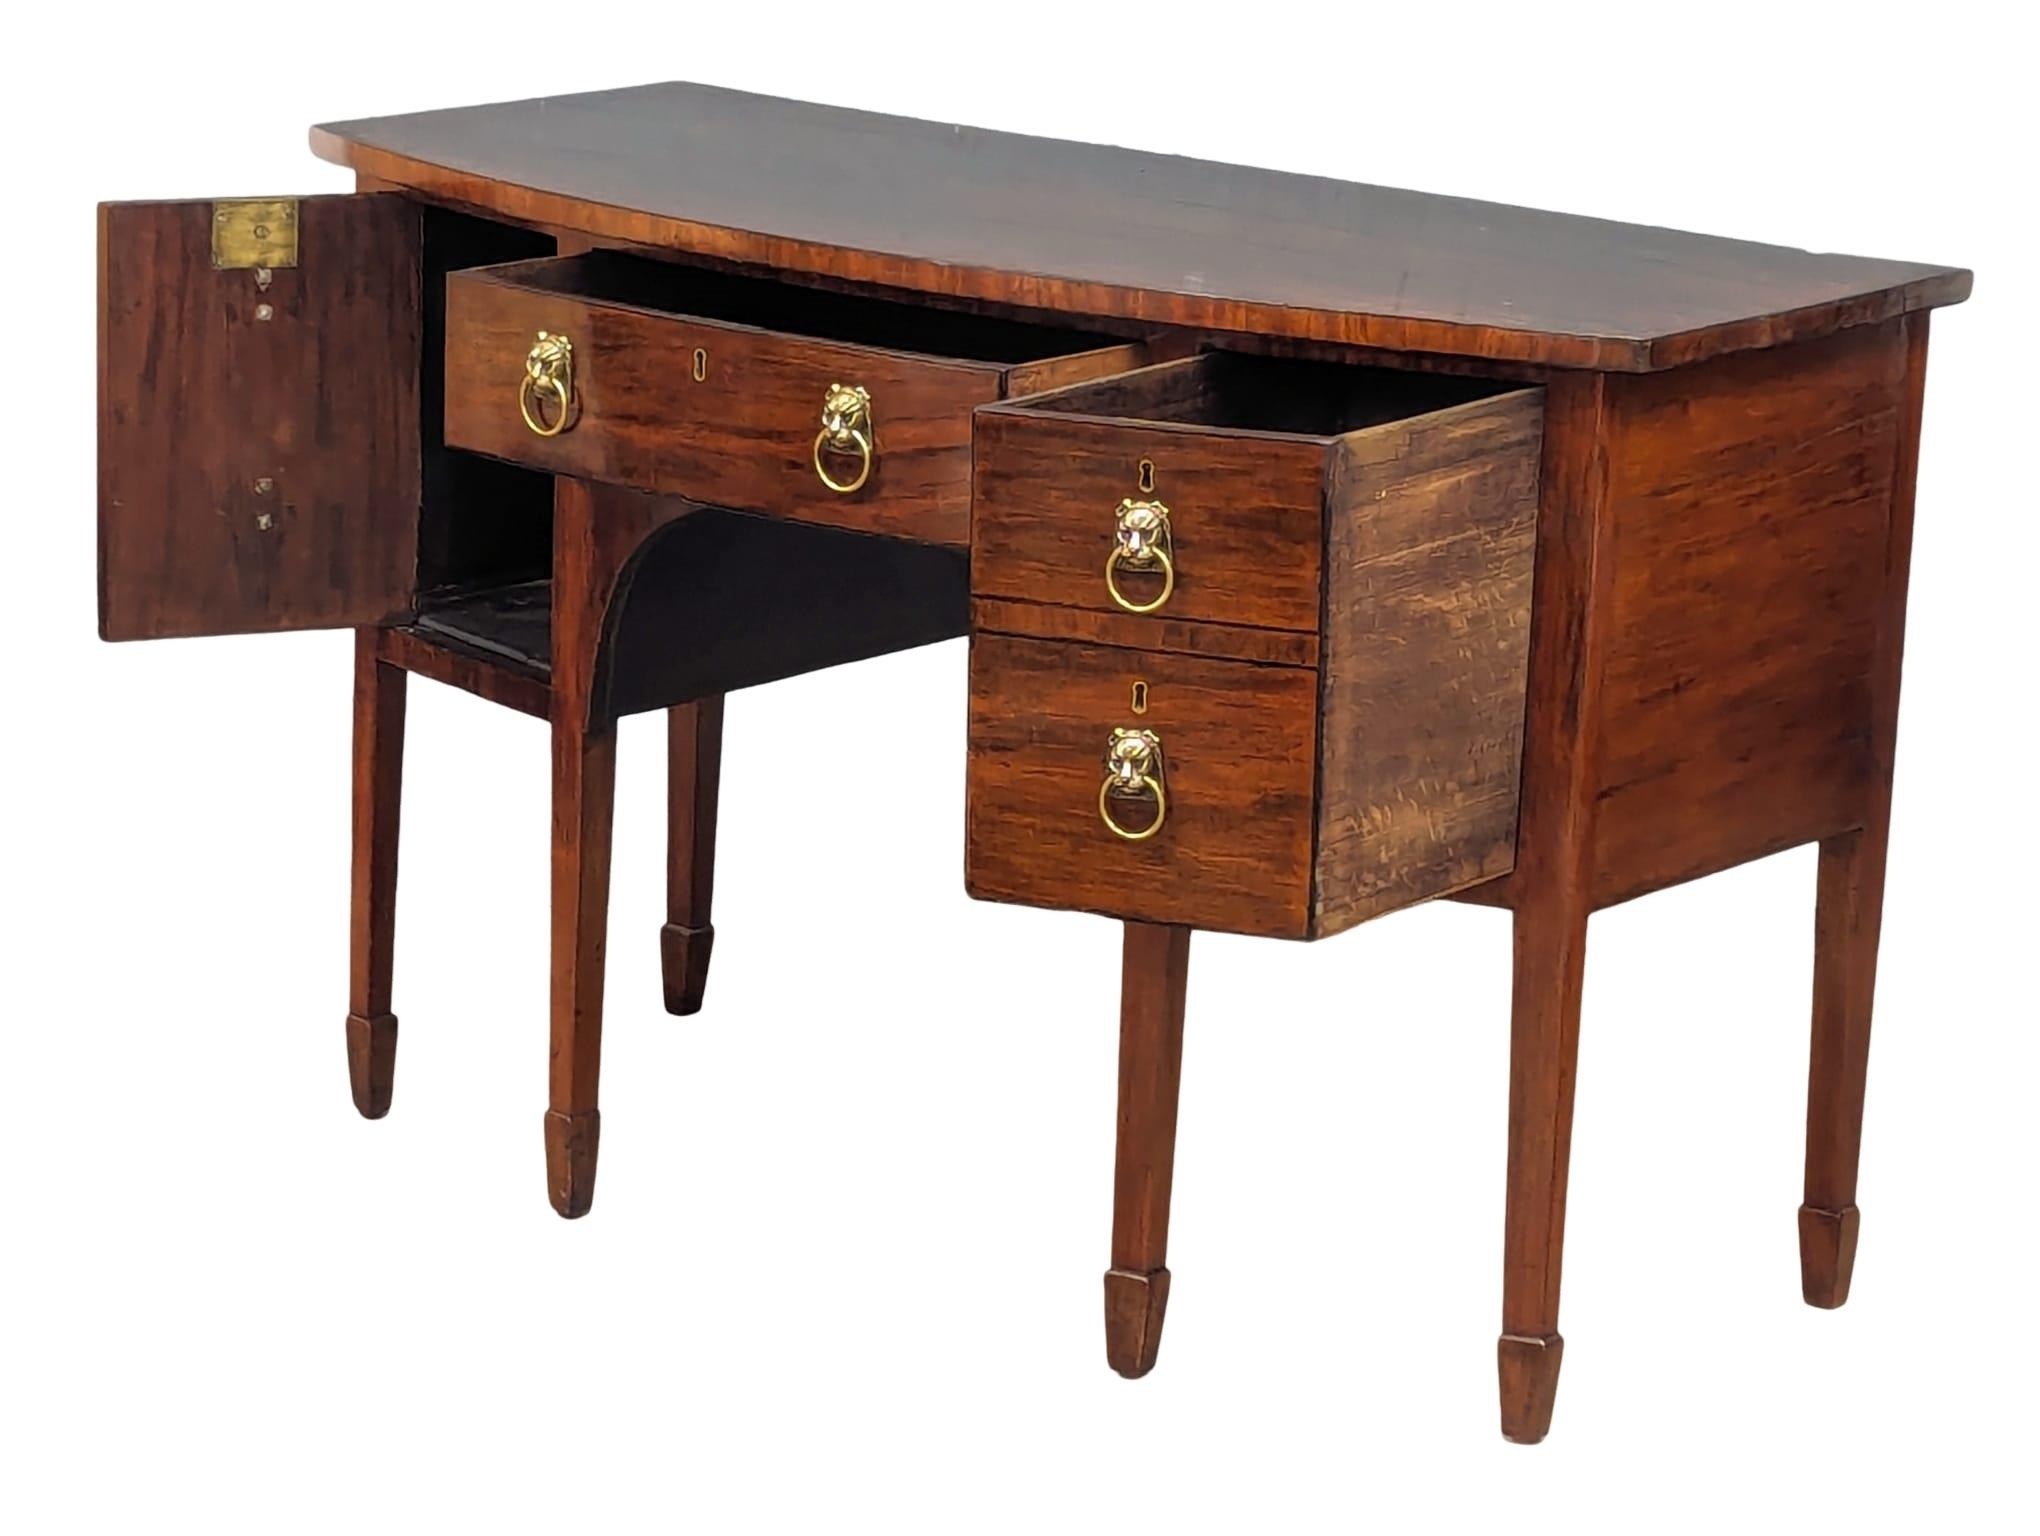 A 19th Century mahogany bow front side table with brass lion mask handles. By Spillman & Co. London. - Image 7 of 7